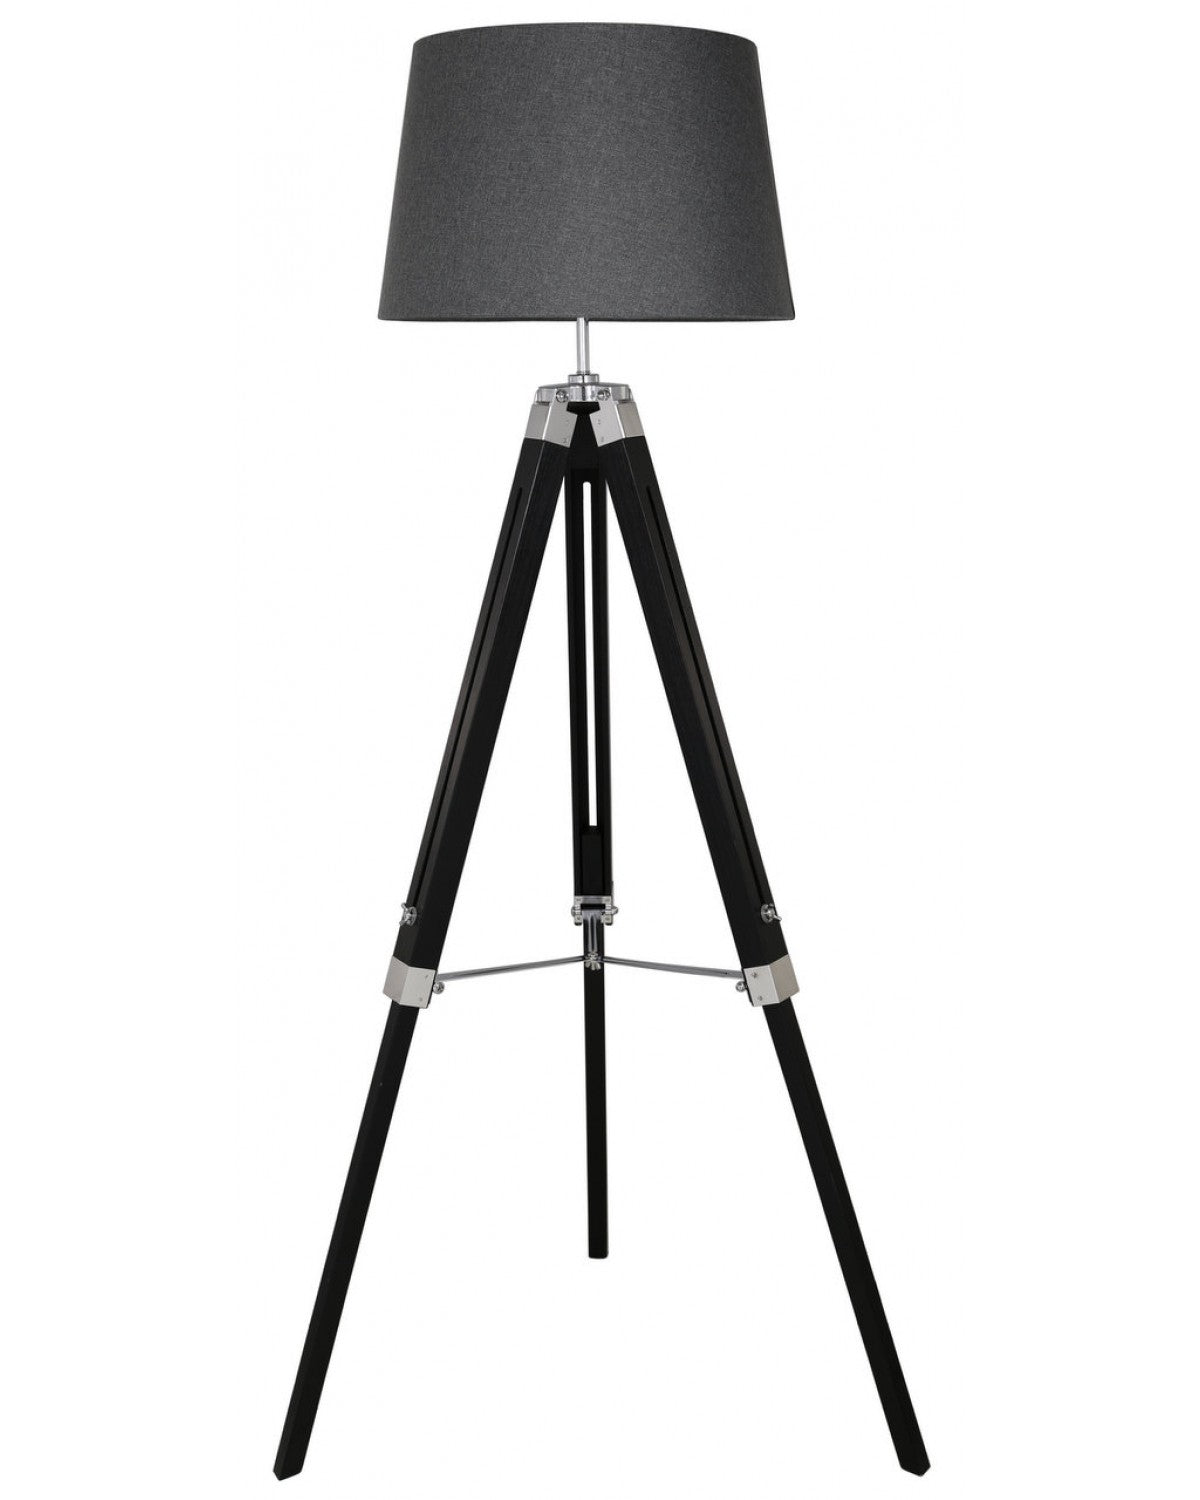 Deco Home Black Hollywood Floor Lamp With Charcoal Shade Natural